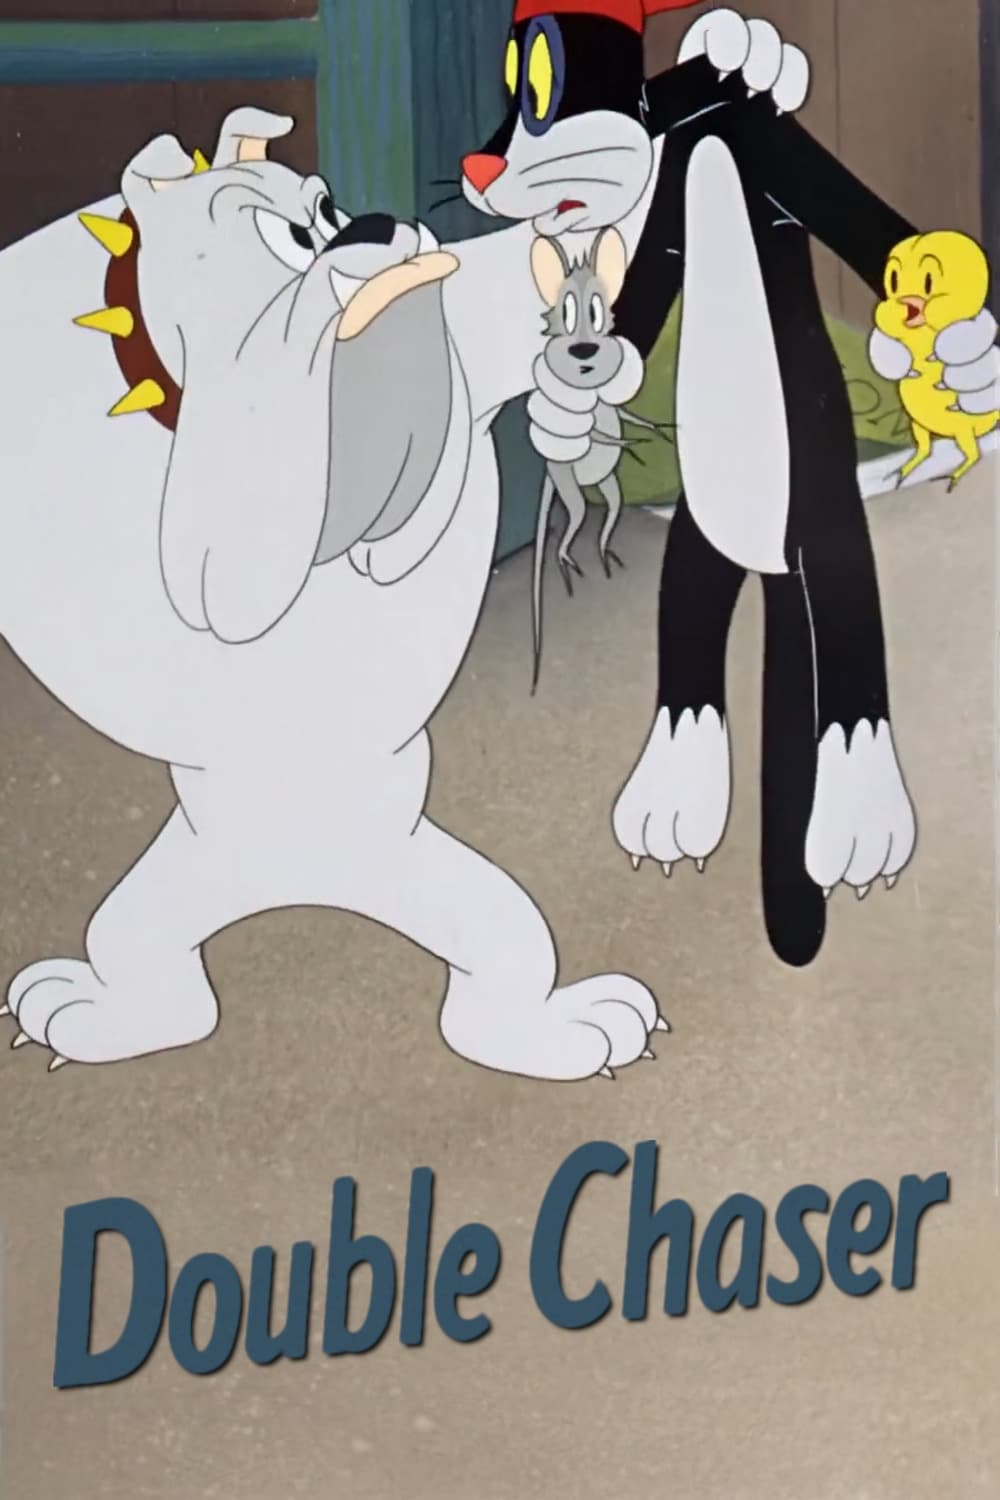 Double Chaser (1942)